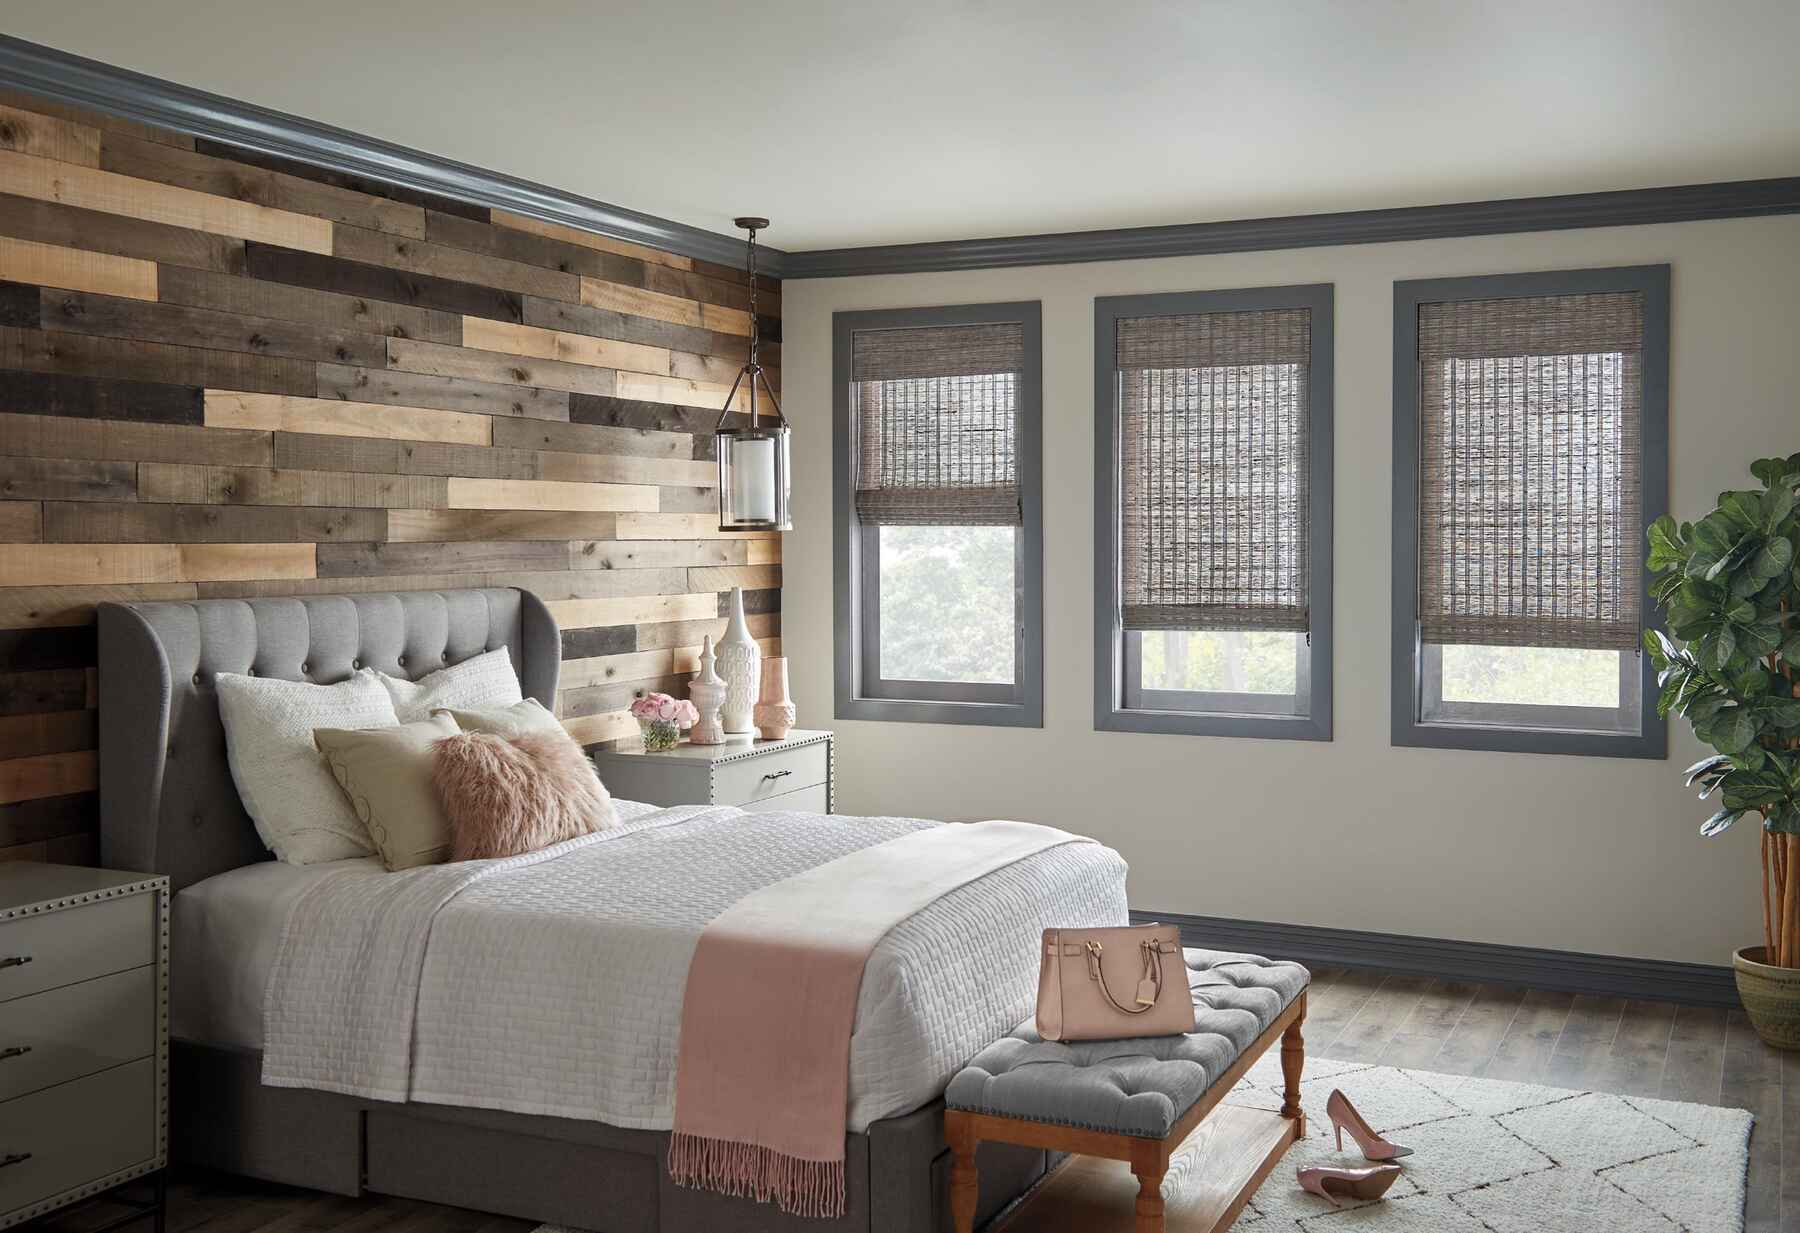 Bedroom with gray accents and textured walls